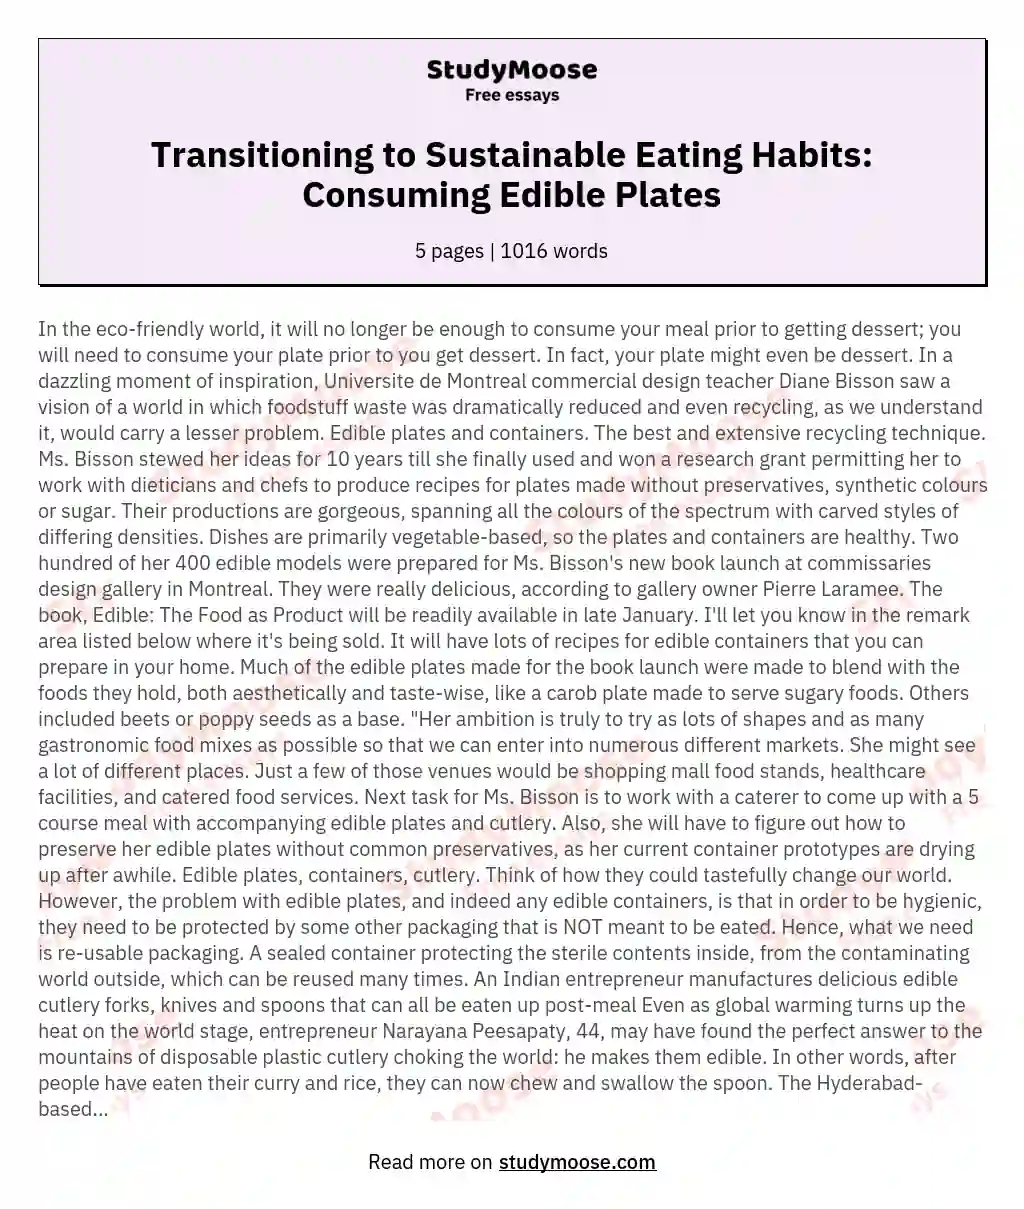 Transitioning to Sustainable Eating Habits: Consuming Edible Plates essay